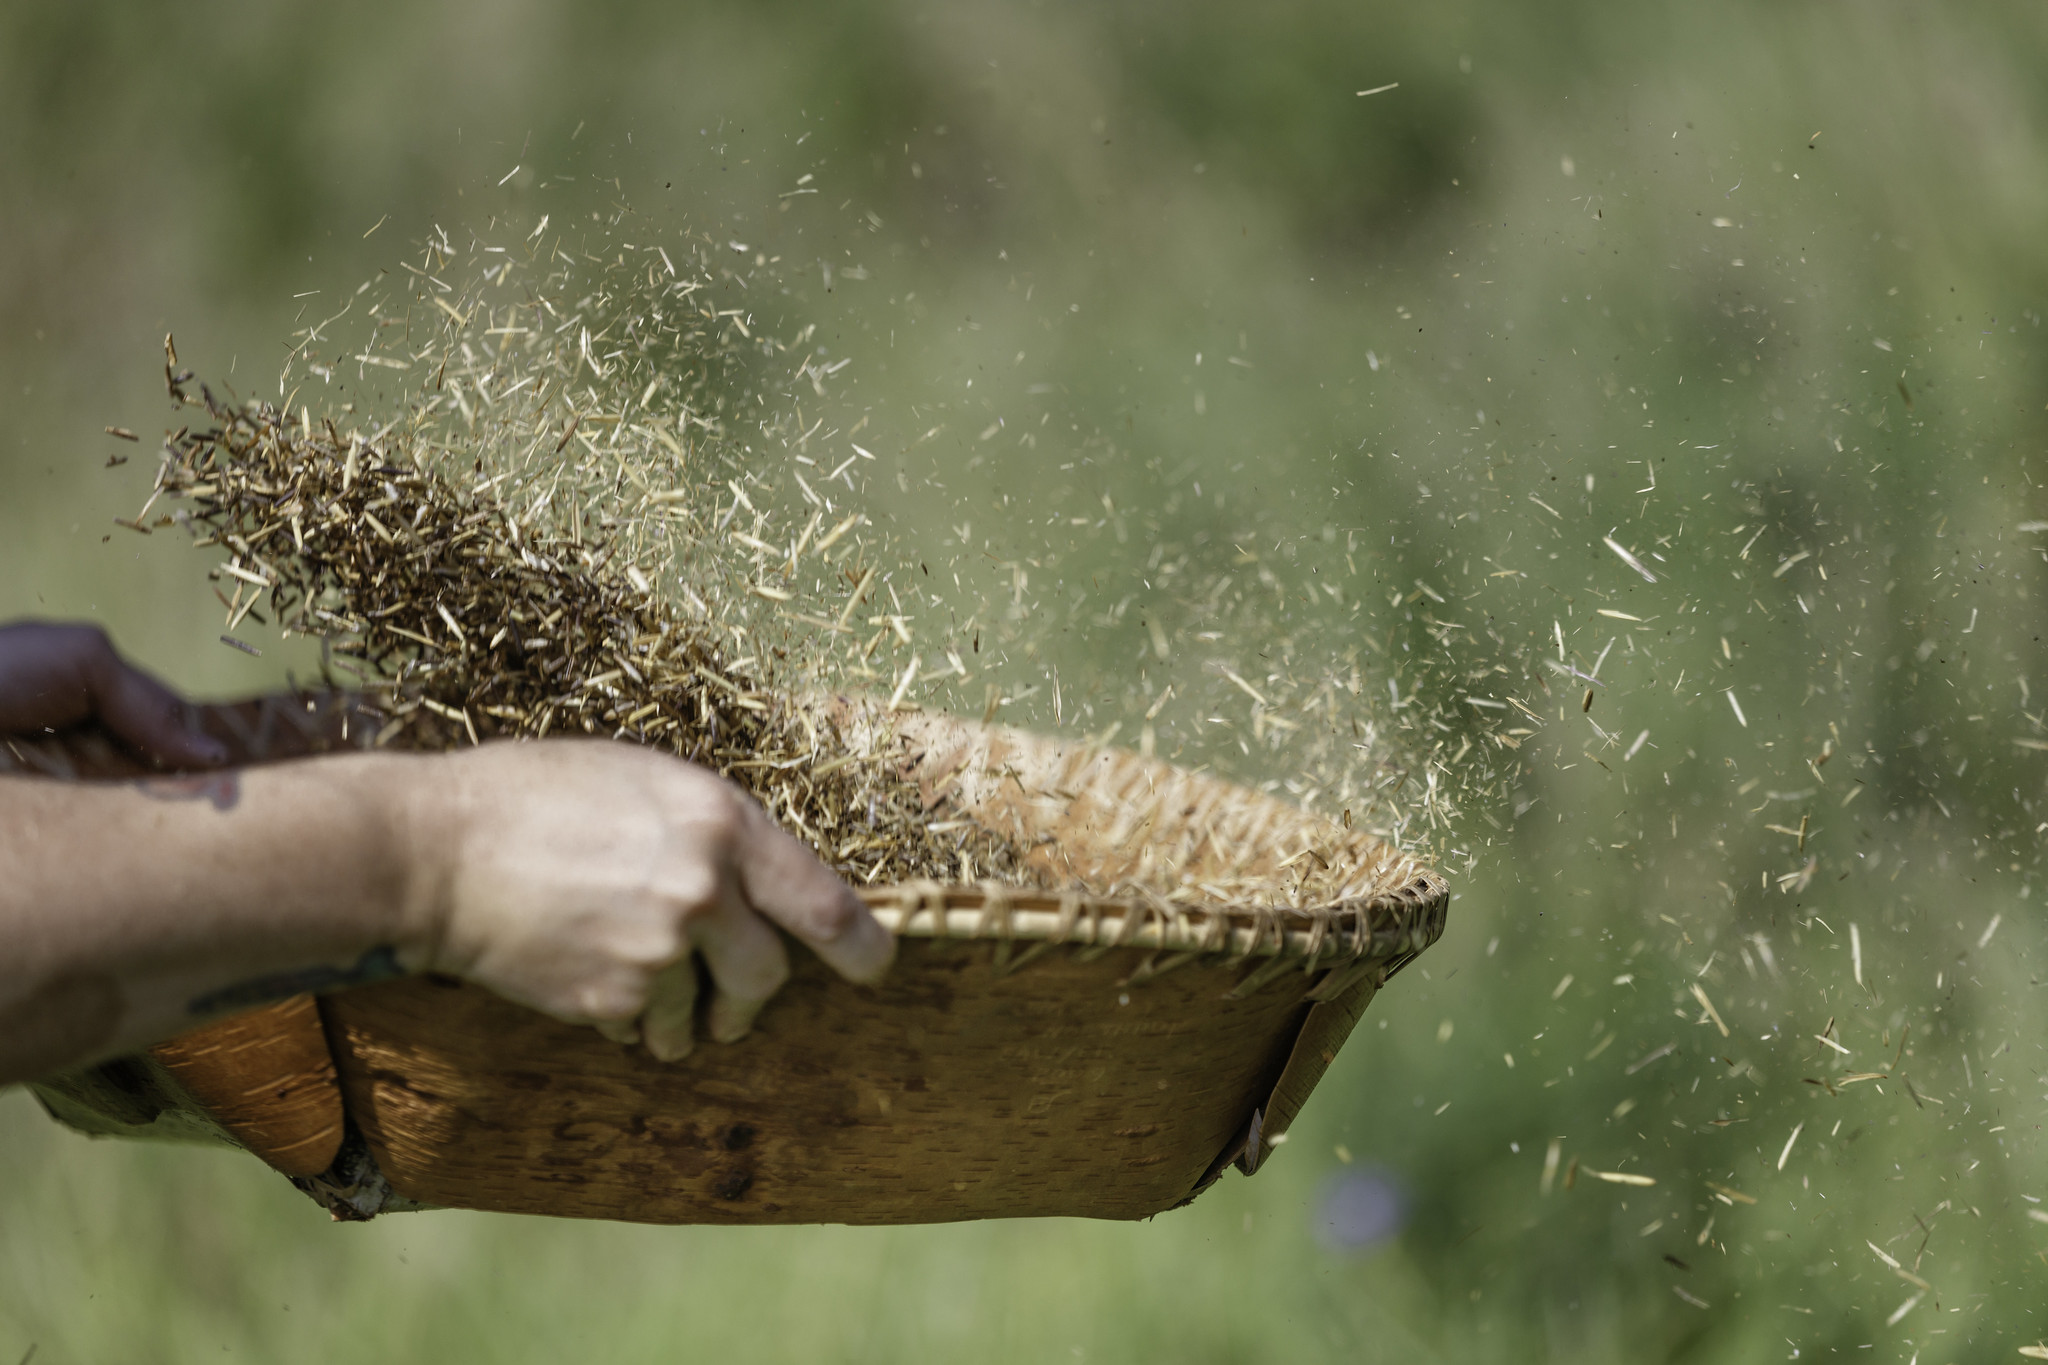 Photograph of a person winnowing wild rice in Minnesota, U.S.A. The photo shows the hands and the forearm of a person holding a basket, perhaps made out of pieces of bark. The person is tossing the rice up into the air. Chaff can be seen flying off the rice and into the air on the right side of the image.